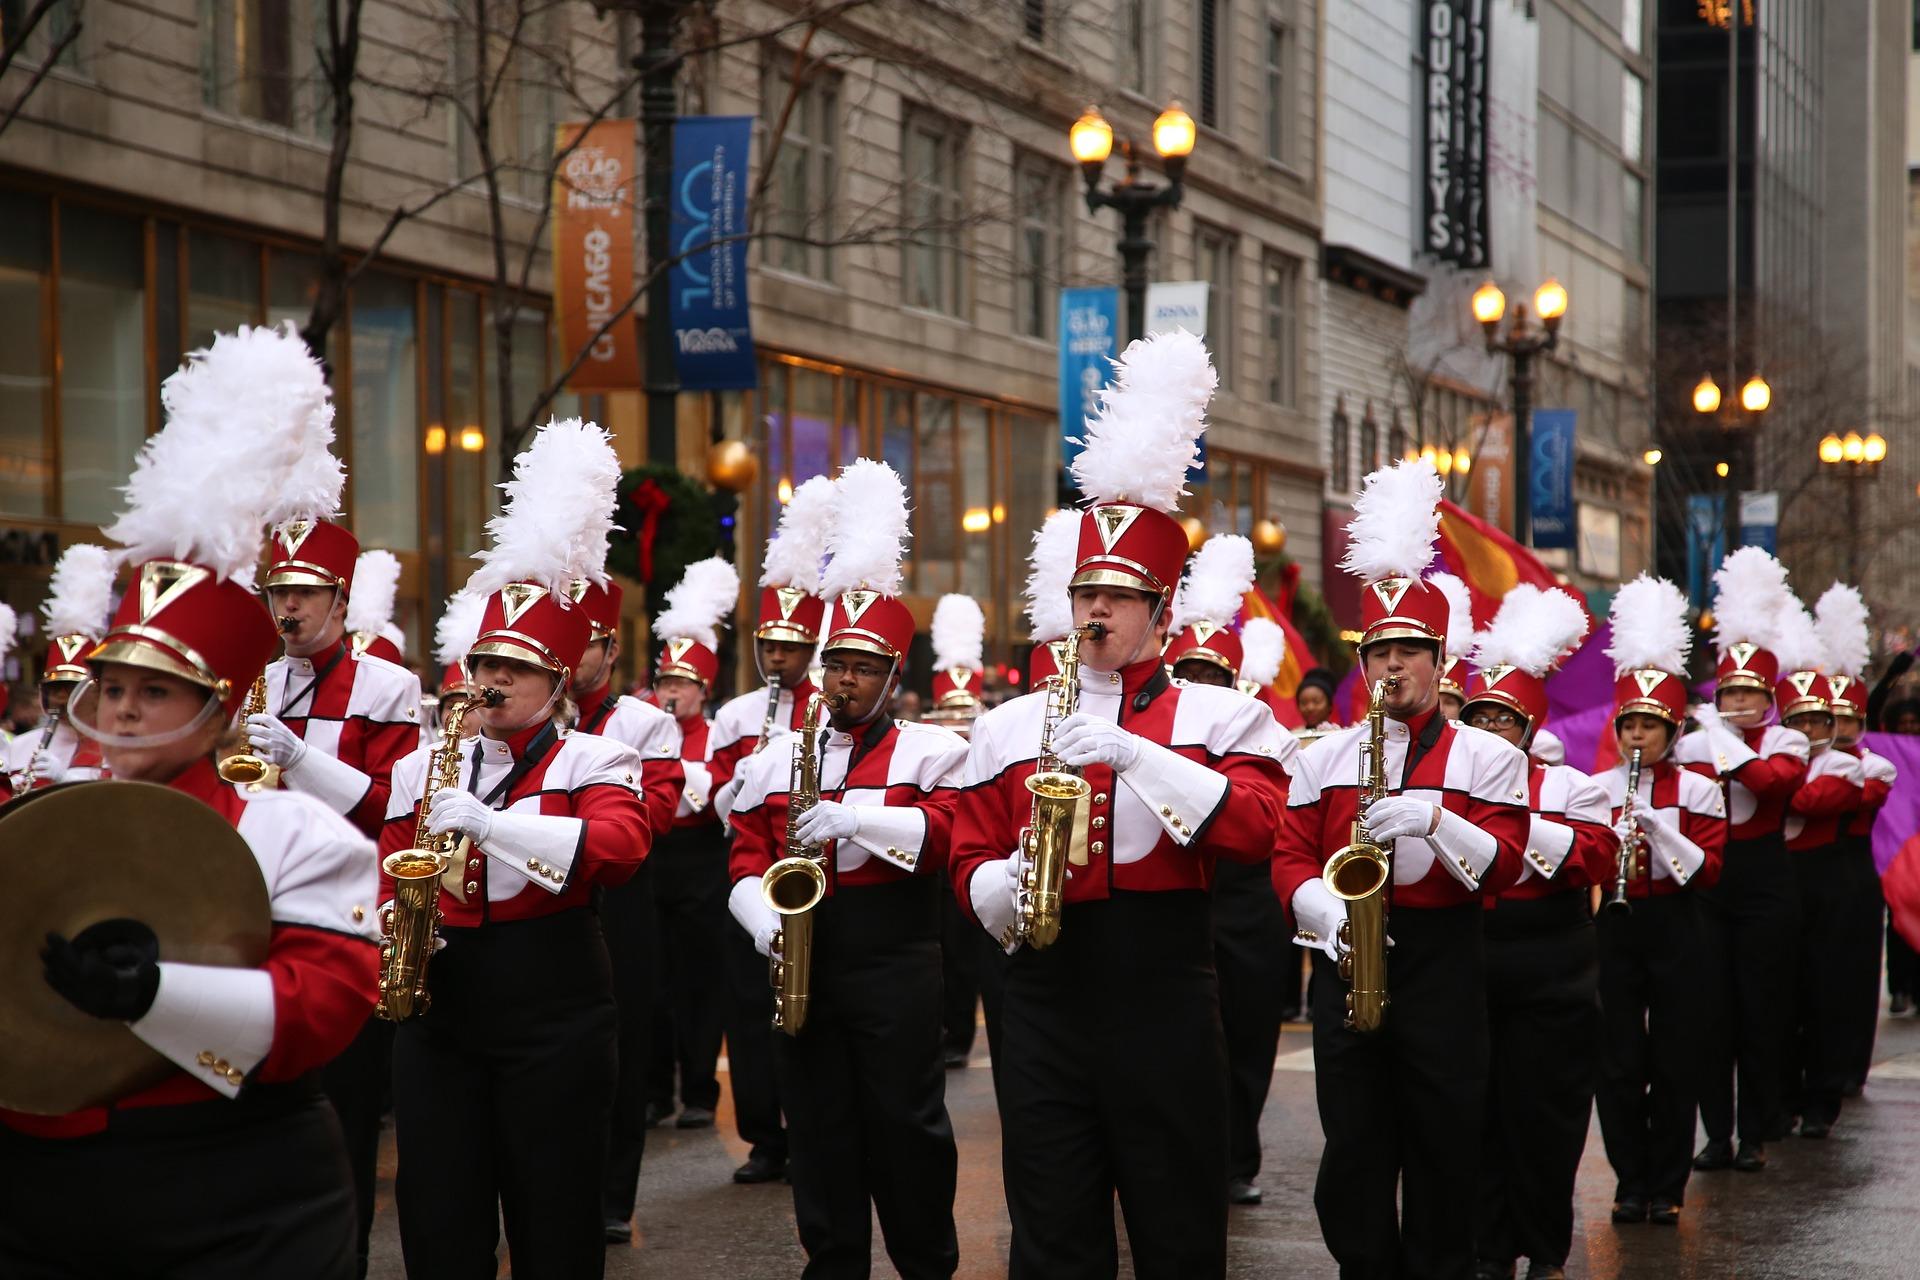 Image of marching band in the streets